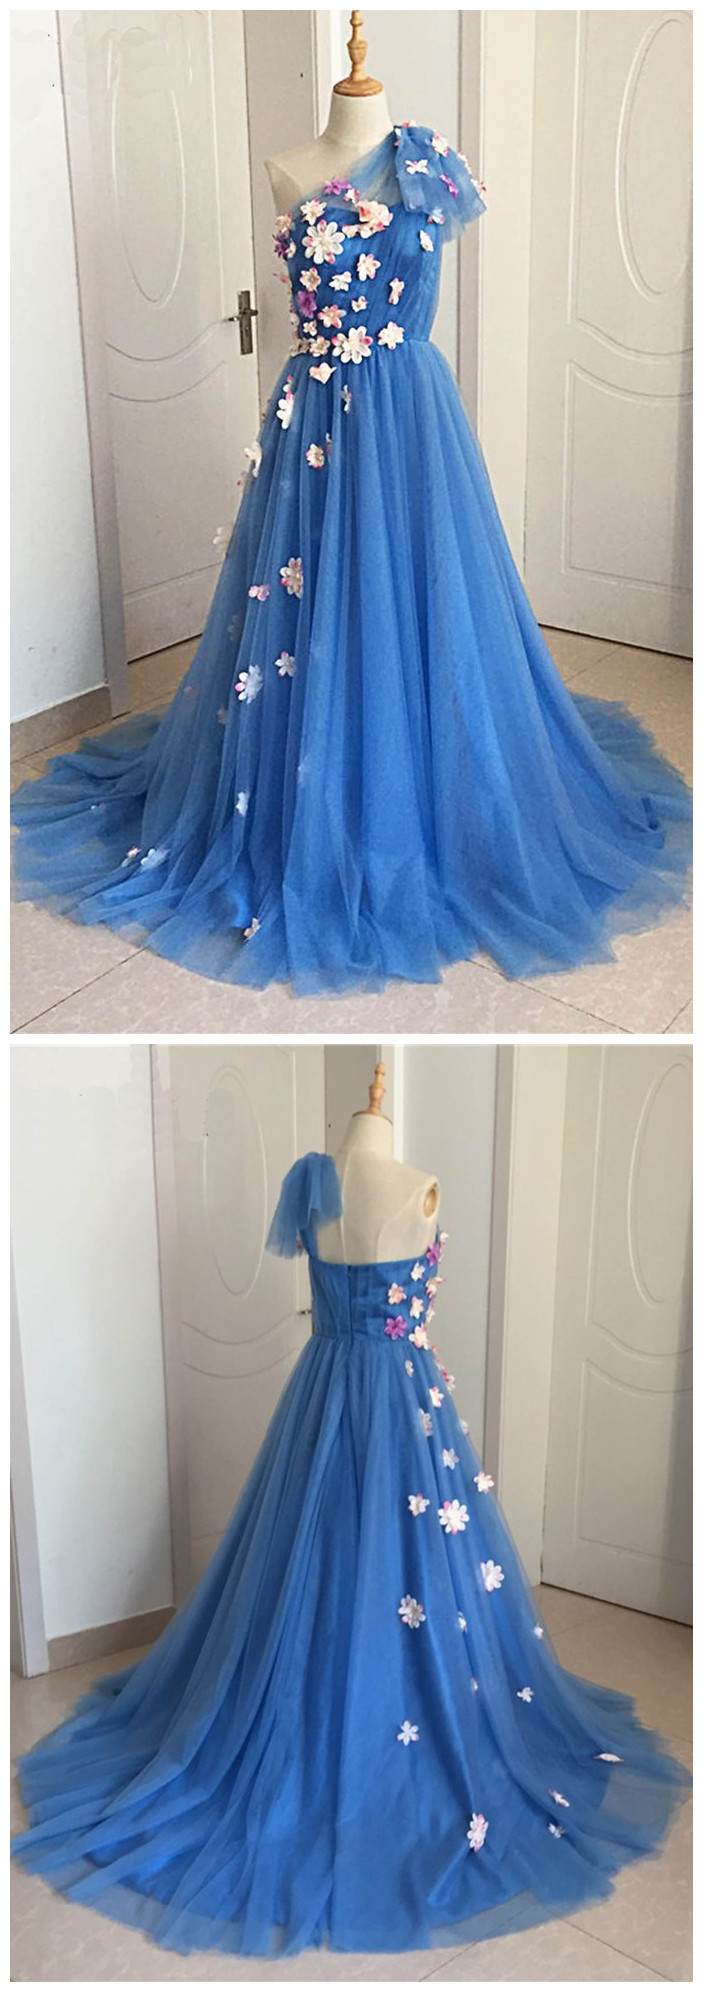 Blue Tulle With Flowers One Shoulder Long Formal Dress, Beautiful Prom Gowns